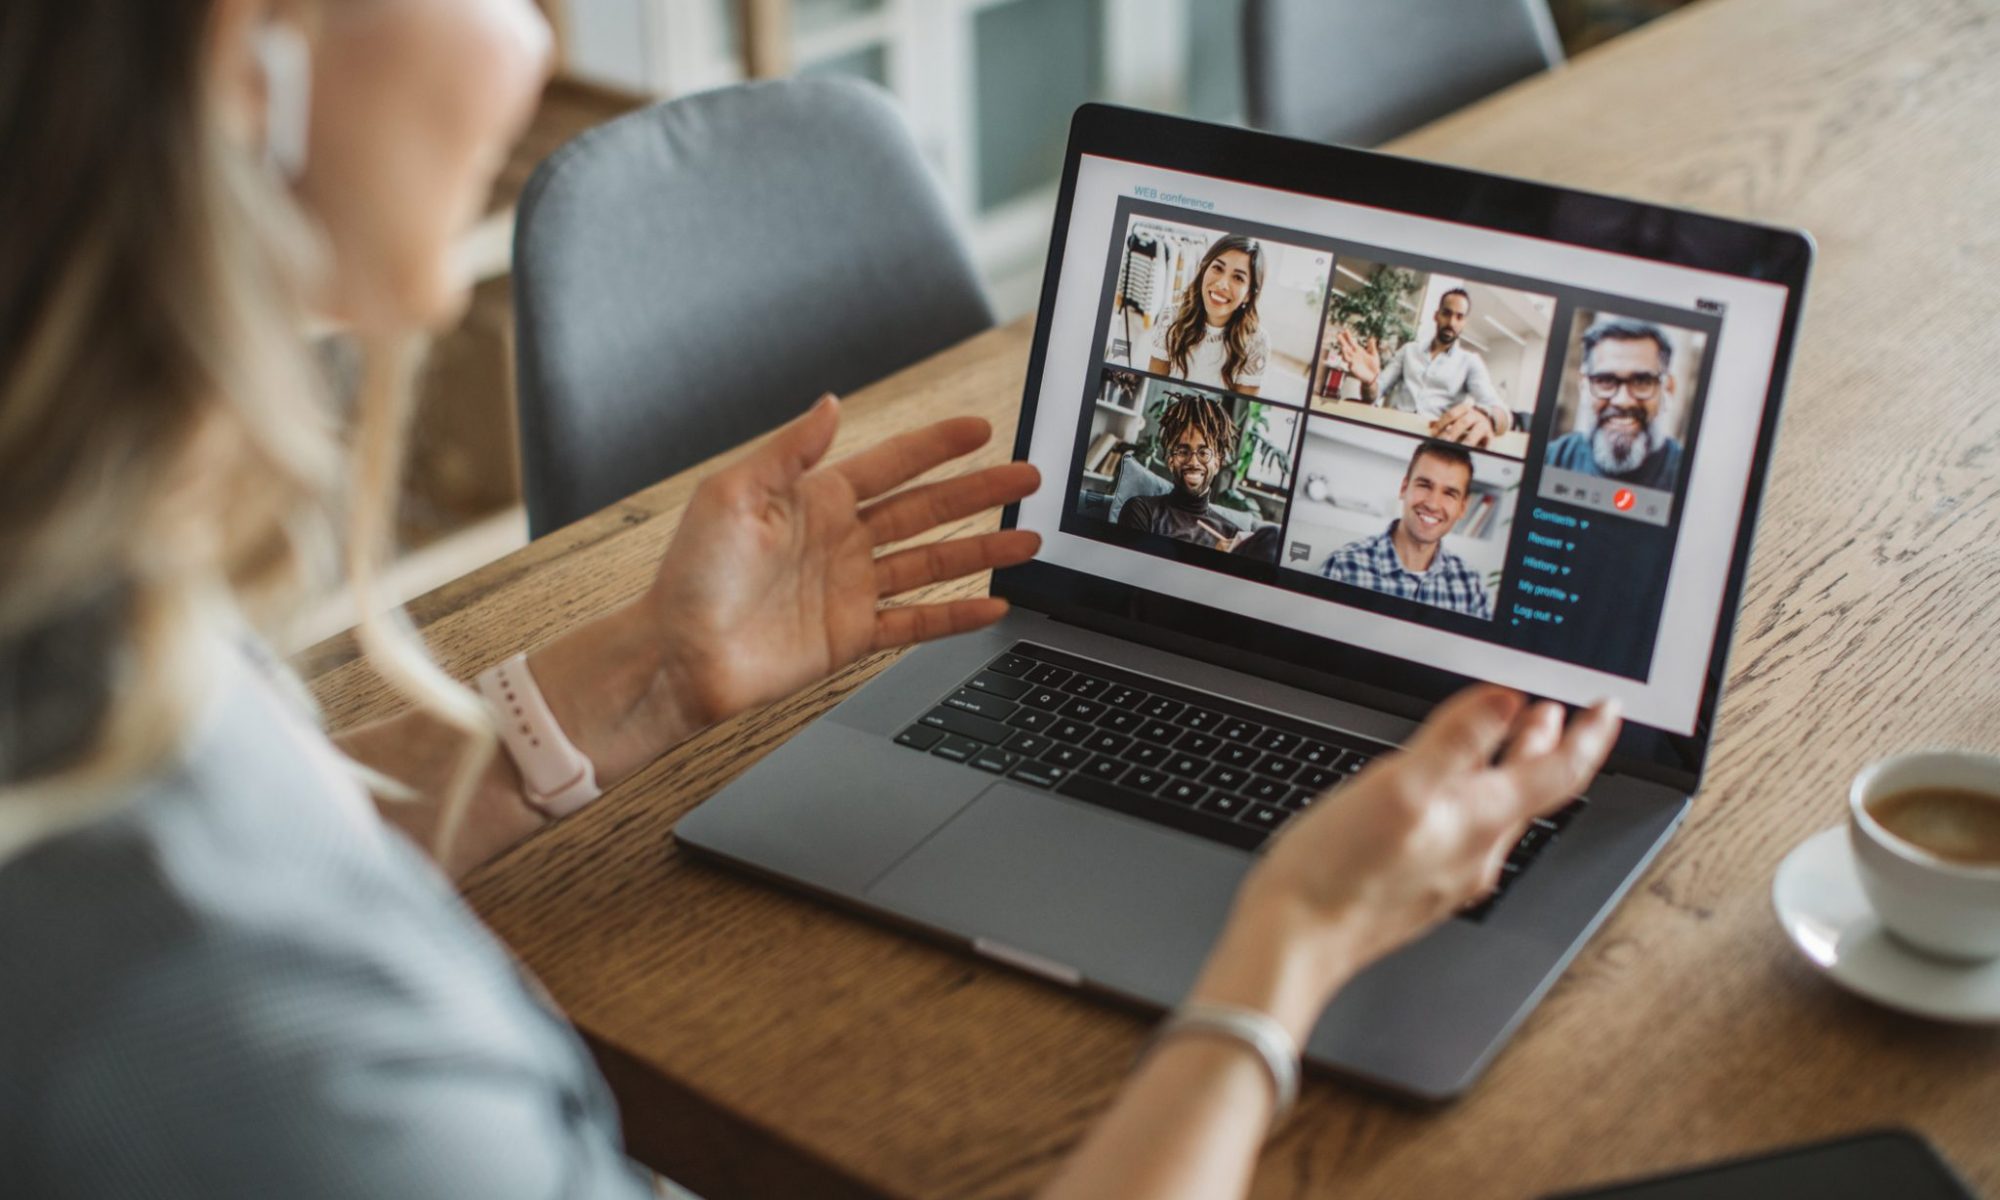 Business Impact article on creating a high-performing hybrid workplace: what should leaders do? A person is having a remote team meeting on the laptop. The individual is working from home engaging with peers. Next to her laptop sits a small shot of espresso.